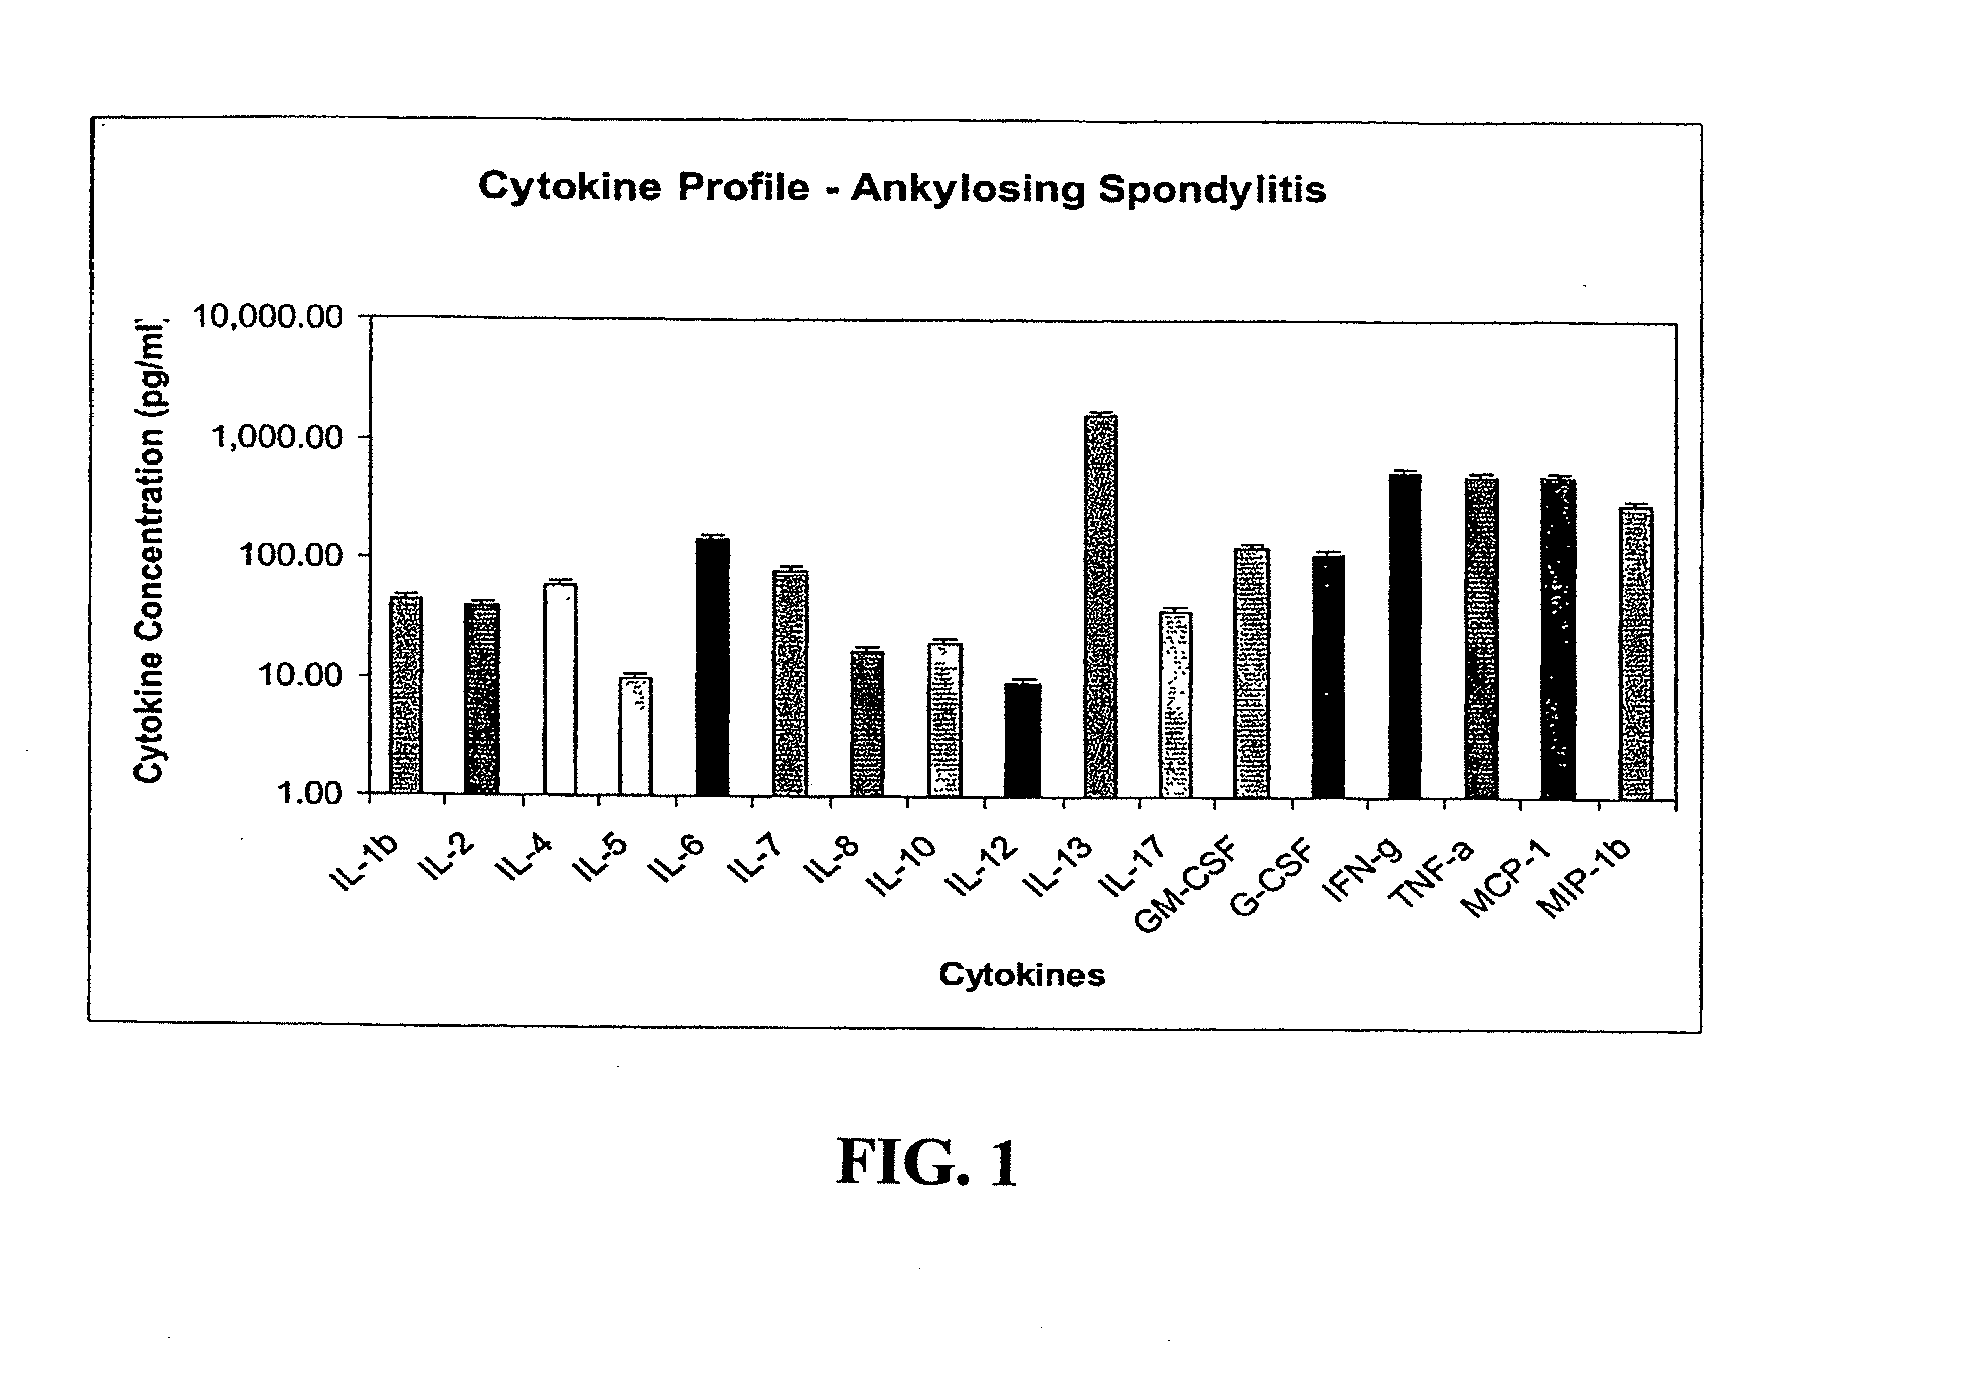 Method of using cytokine assay to diagnose, treat, and evaluate inflammatory and autoimmune diseases